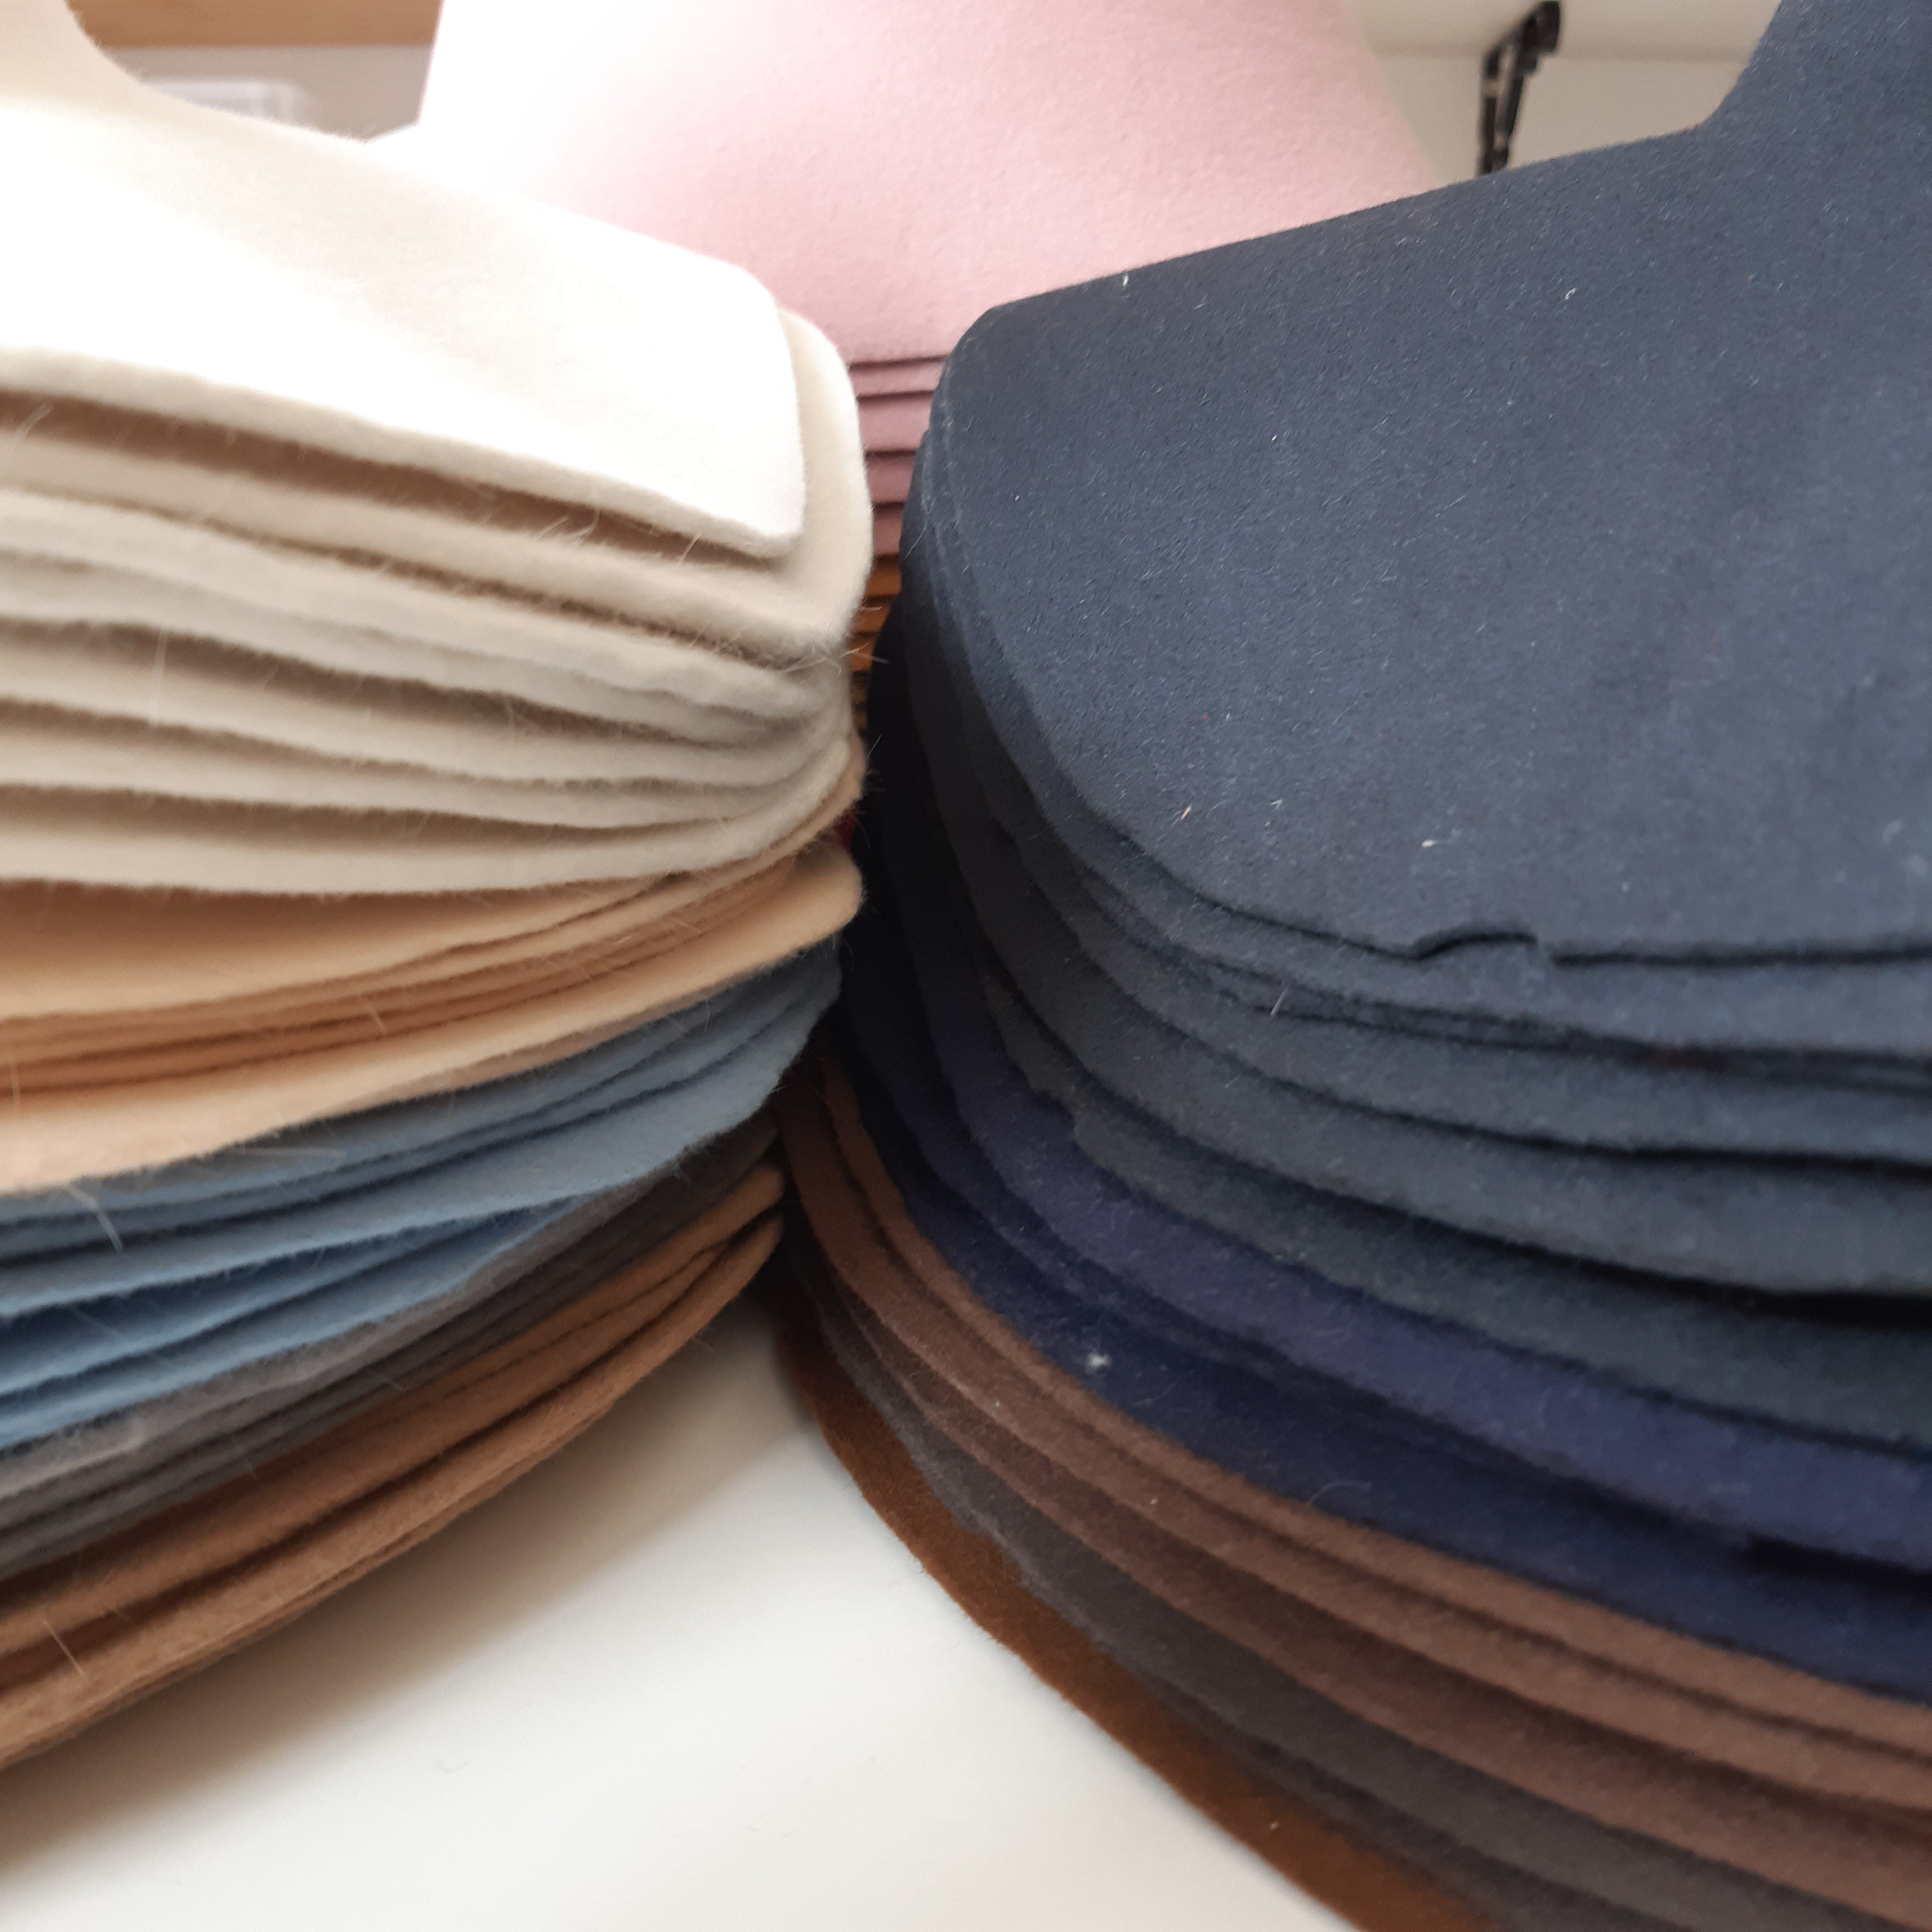 Three stacks of hat bodies in various colors for sale